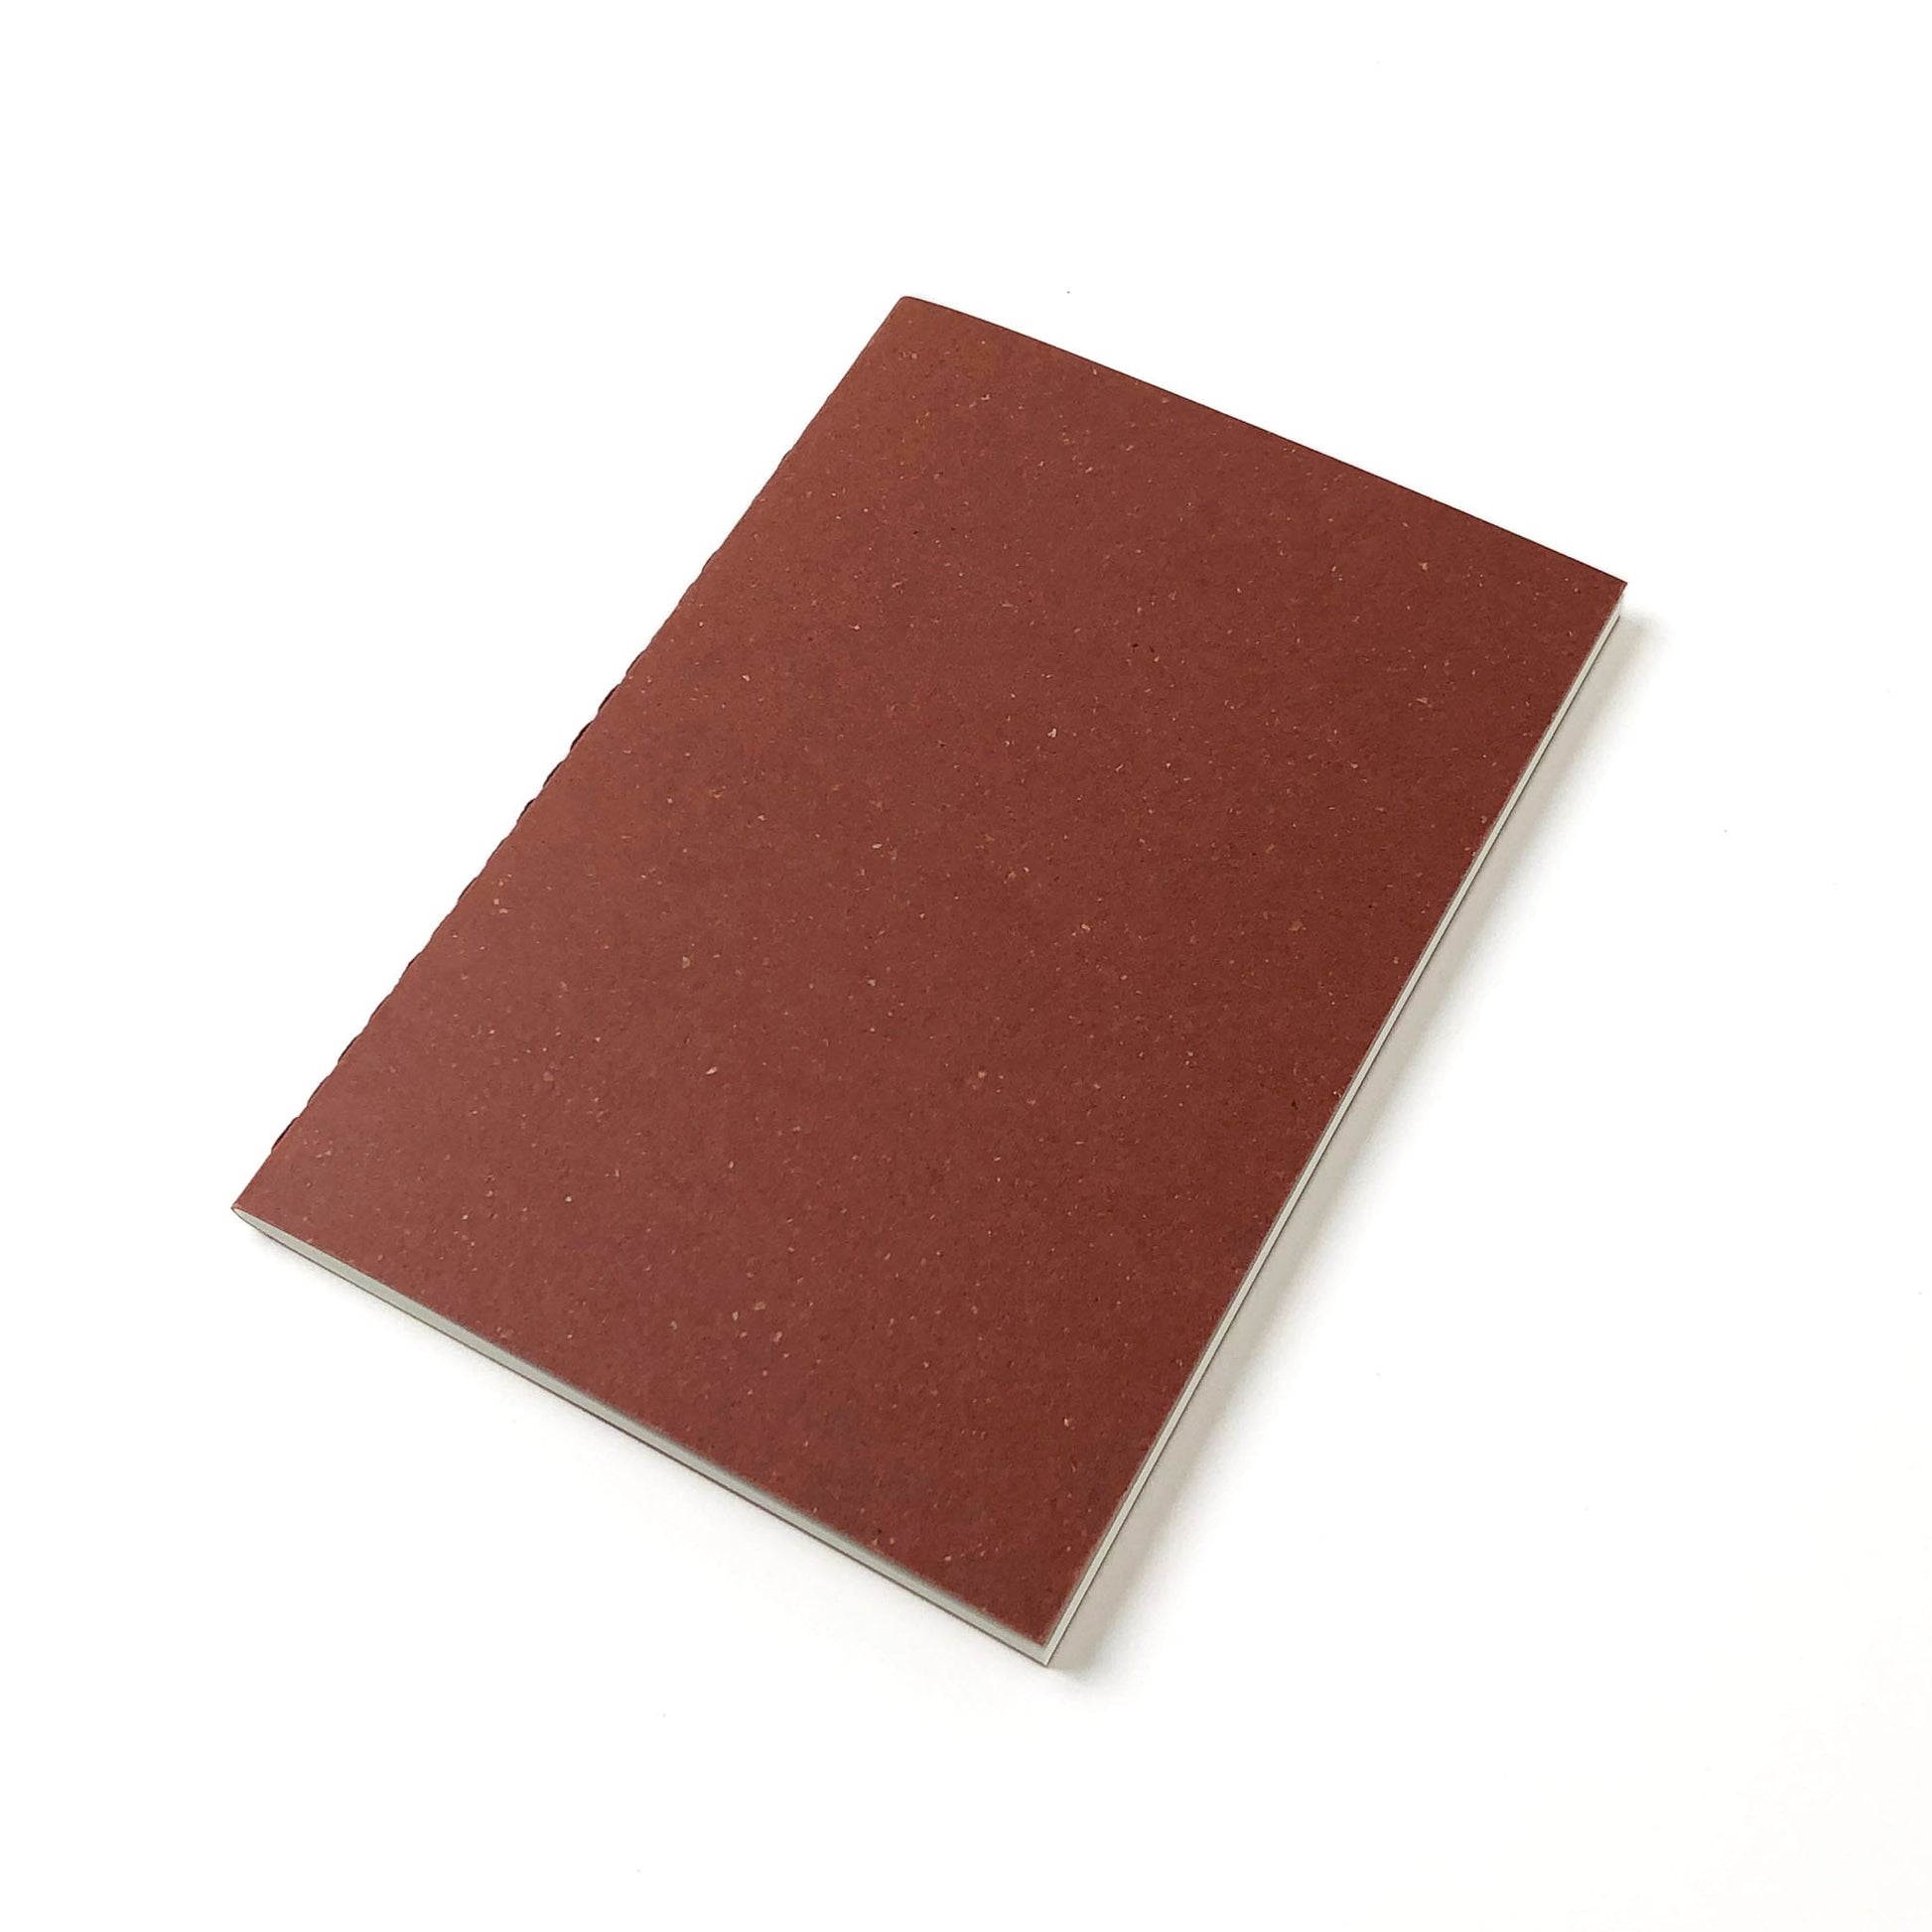 A red-brown speckled notebook with a stitched spine and white pages inside lays on a white background.